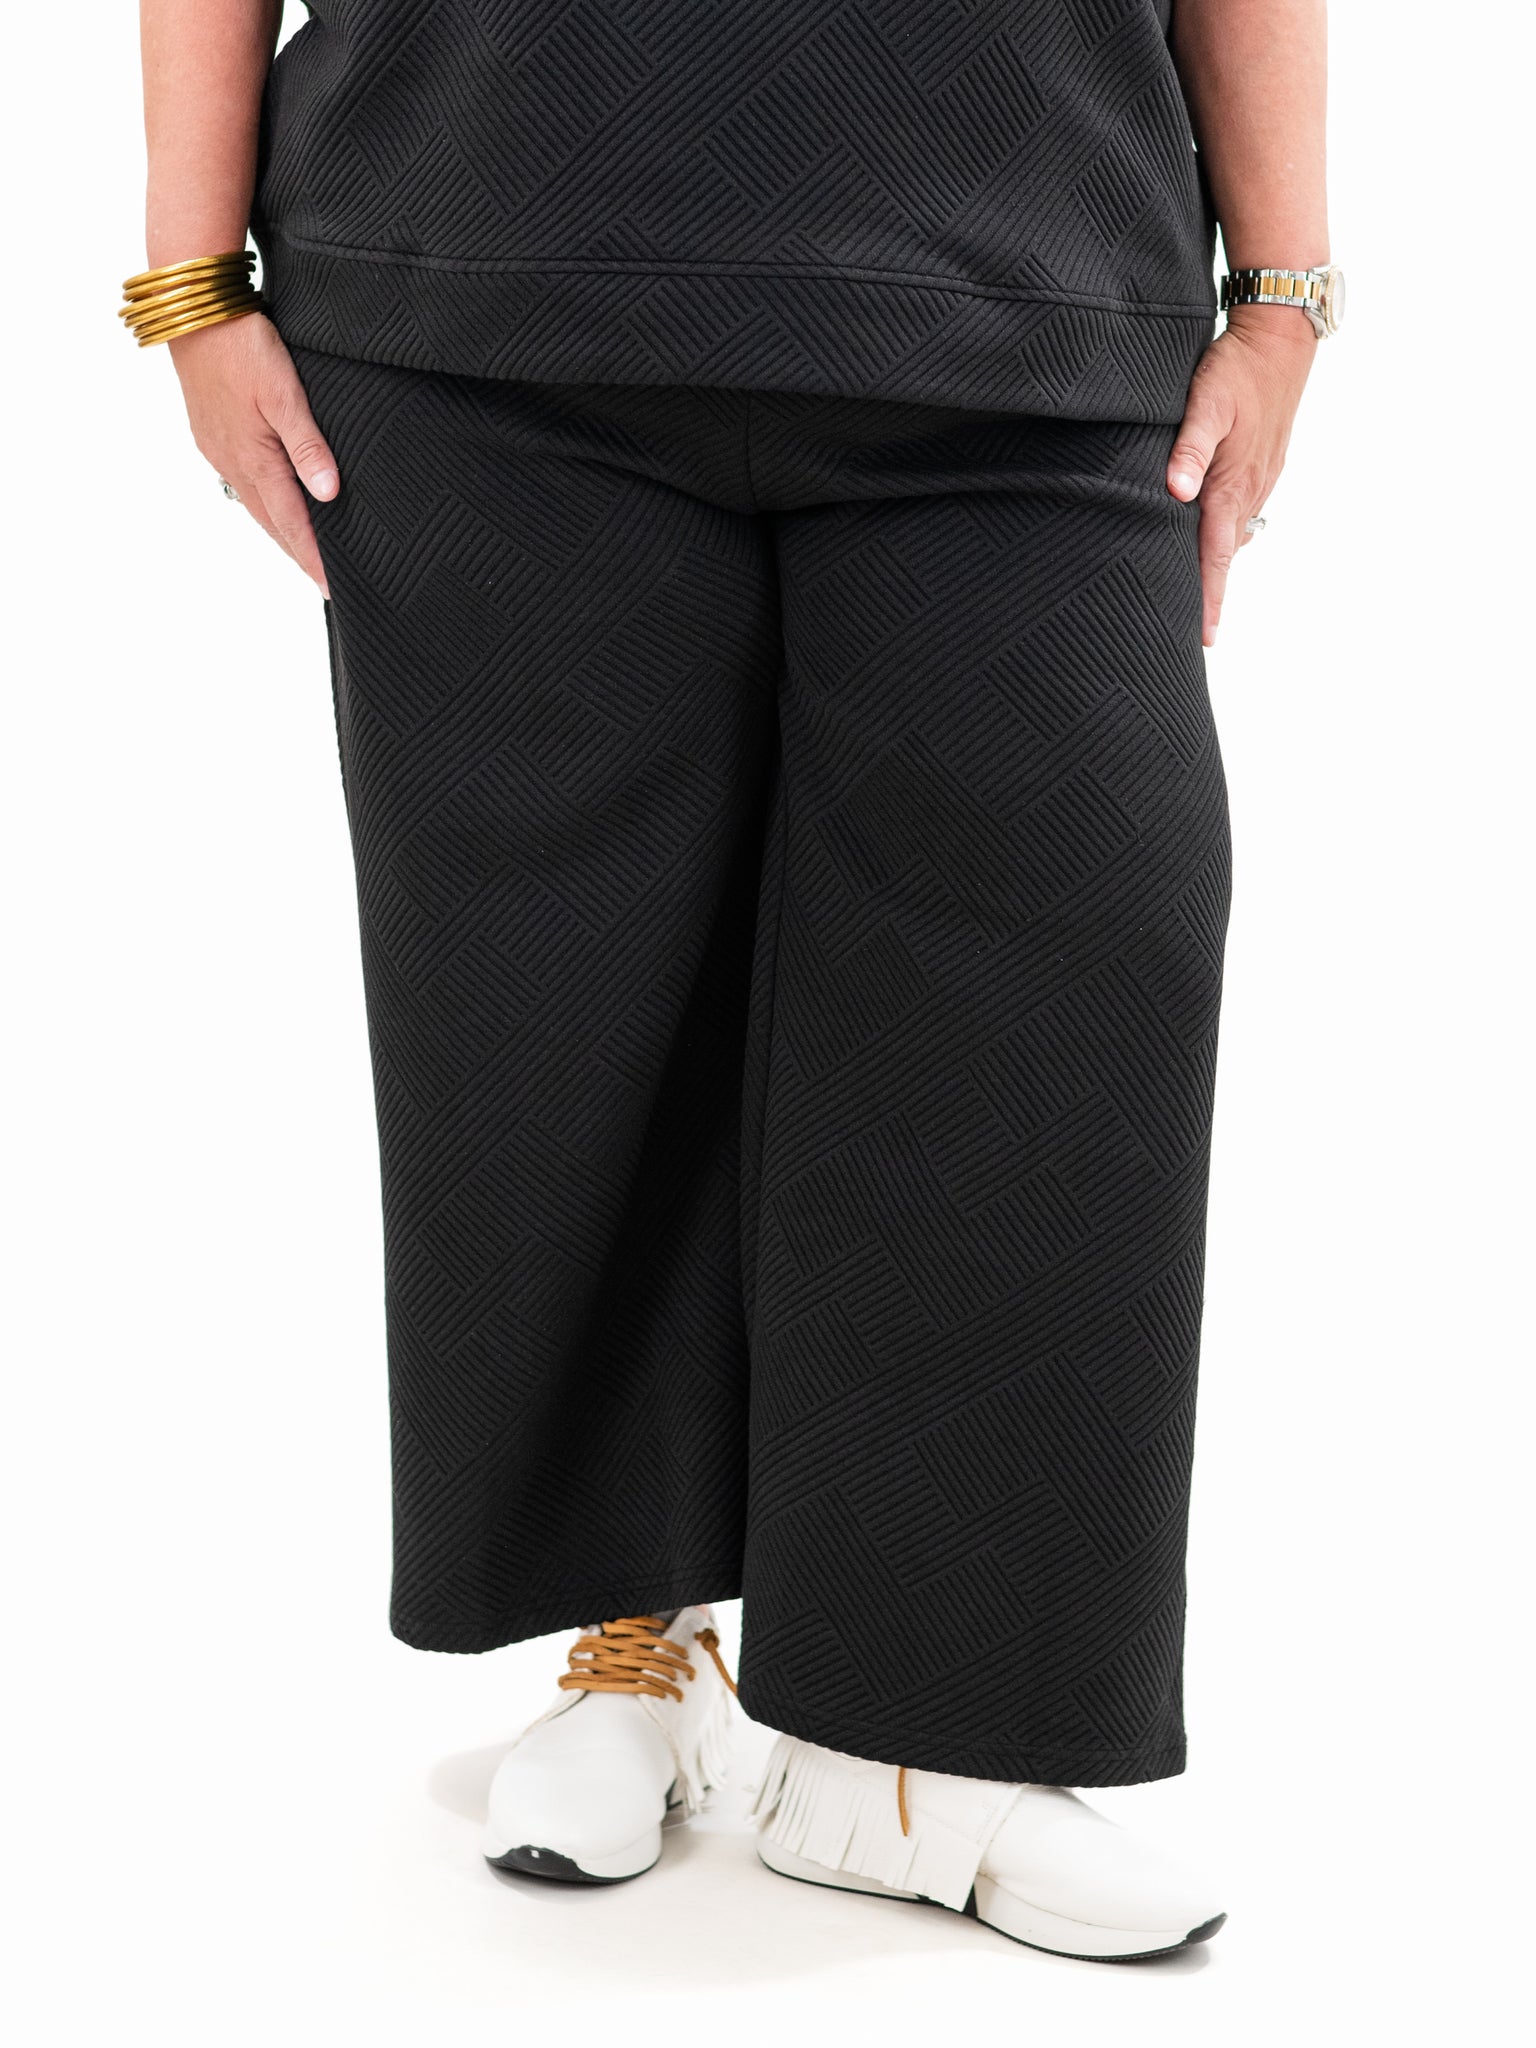 Textured Crop Sweatpant Black by See & Be Seen